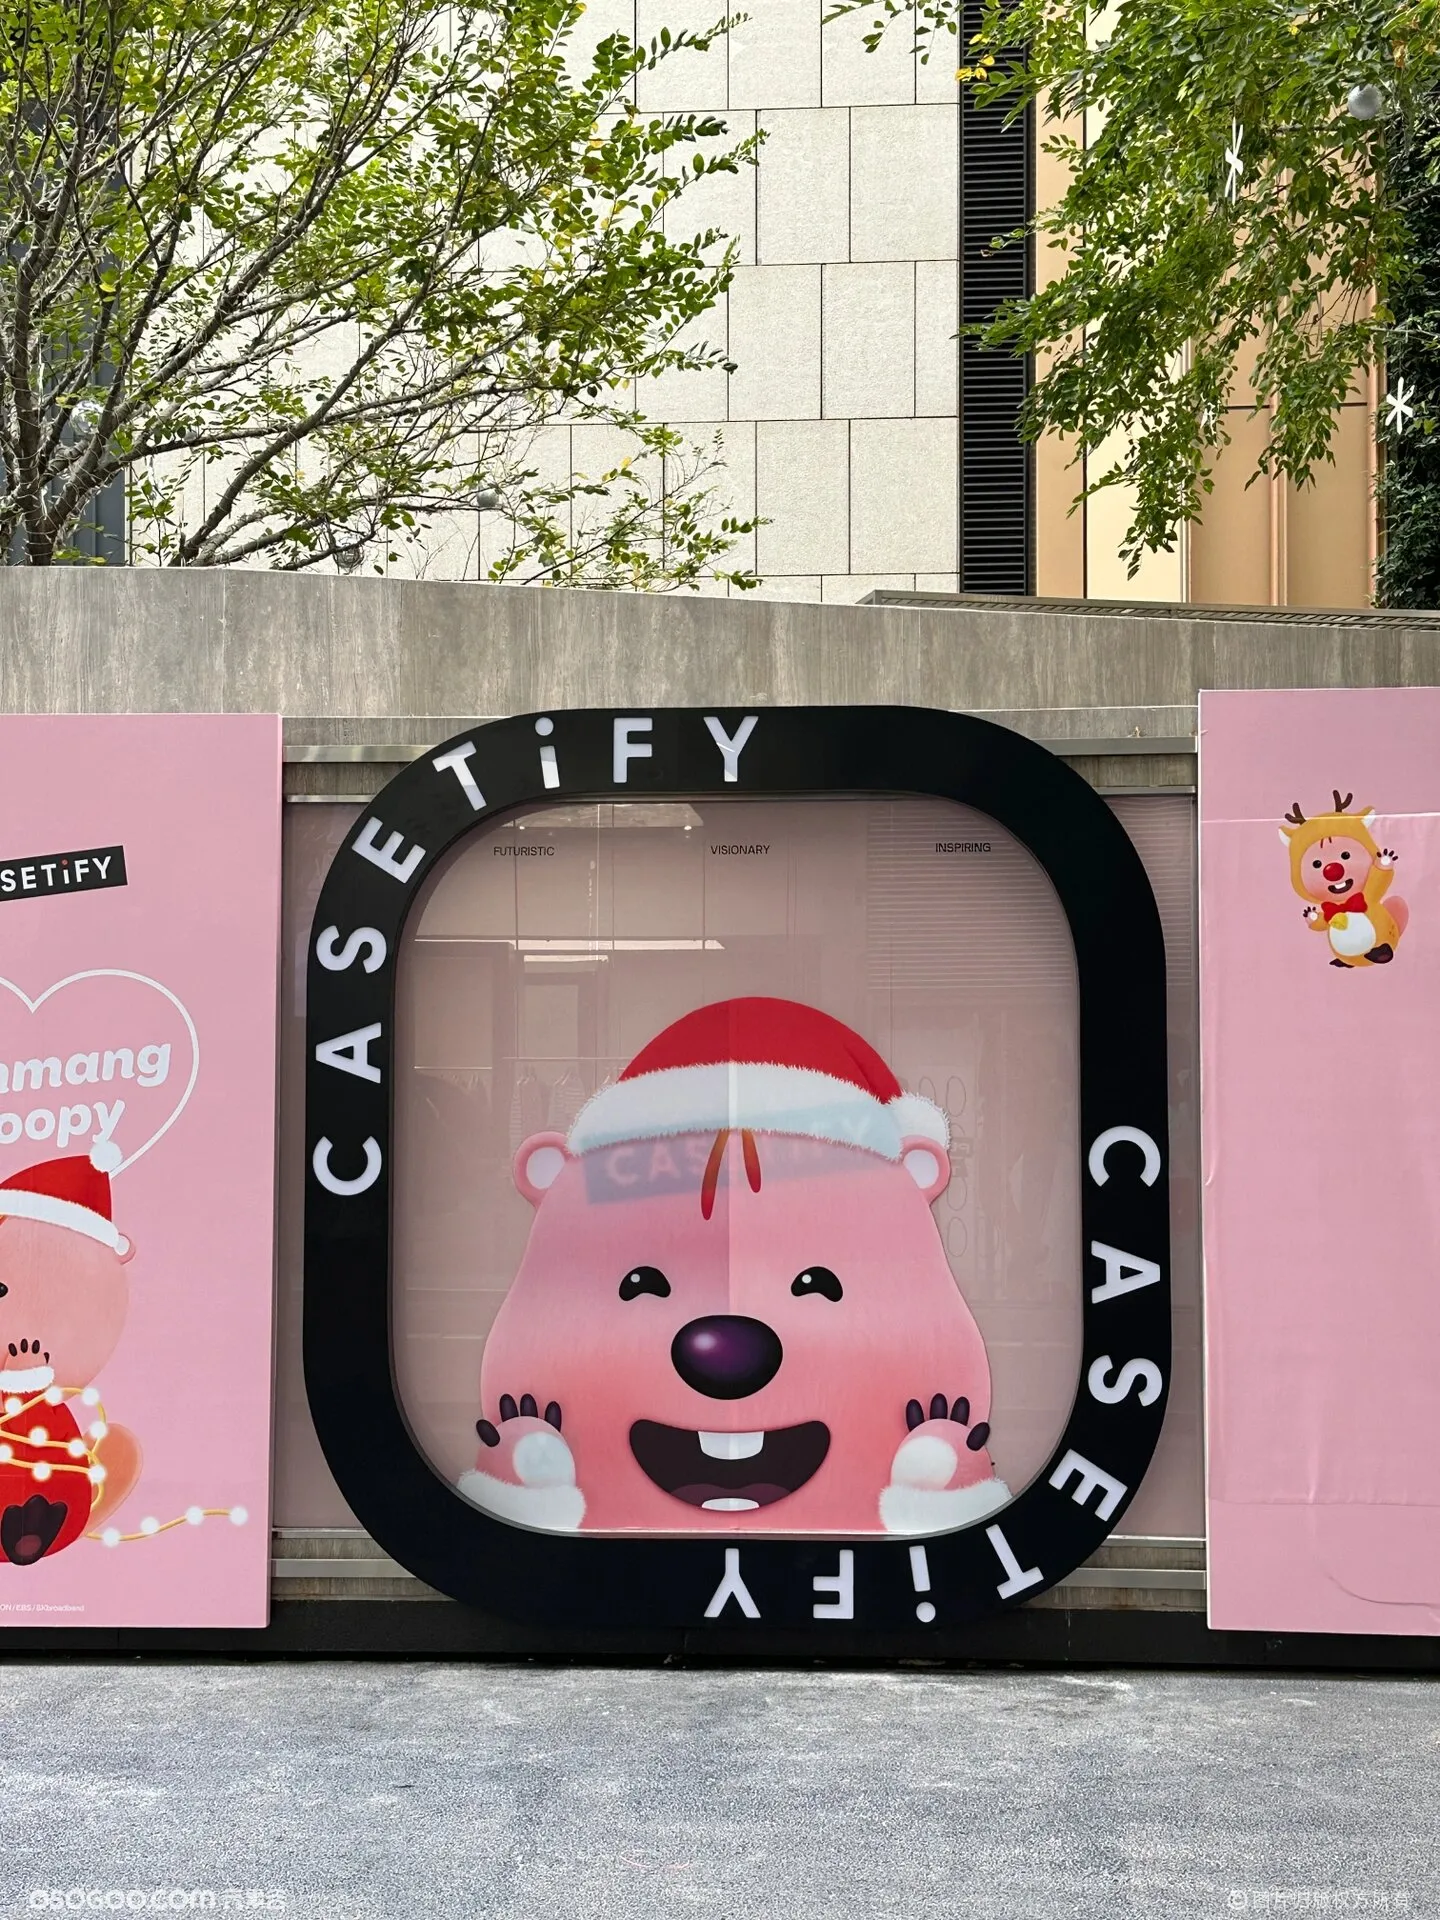 CASETiFY  X LOOPY 限时快闪店